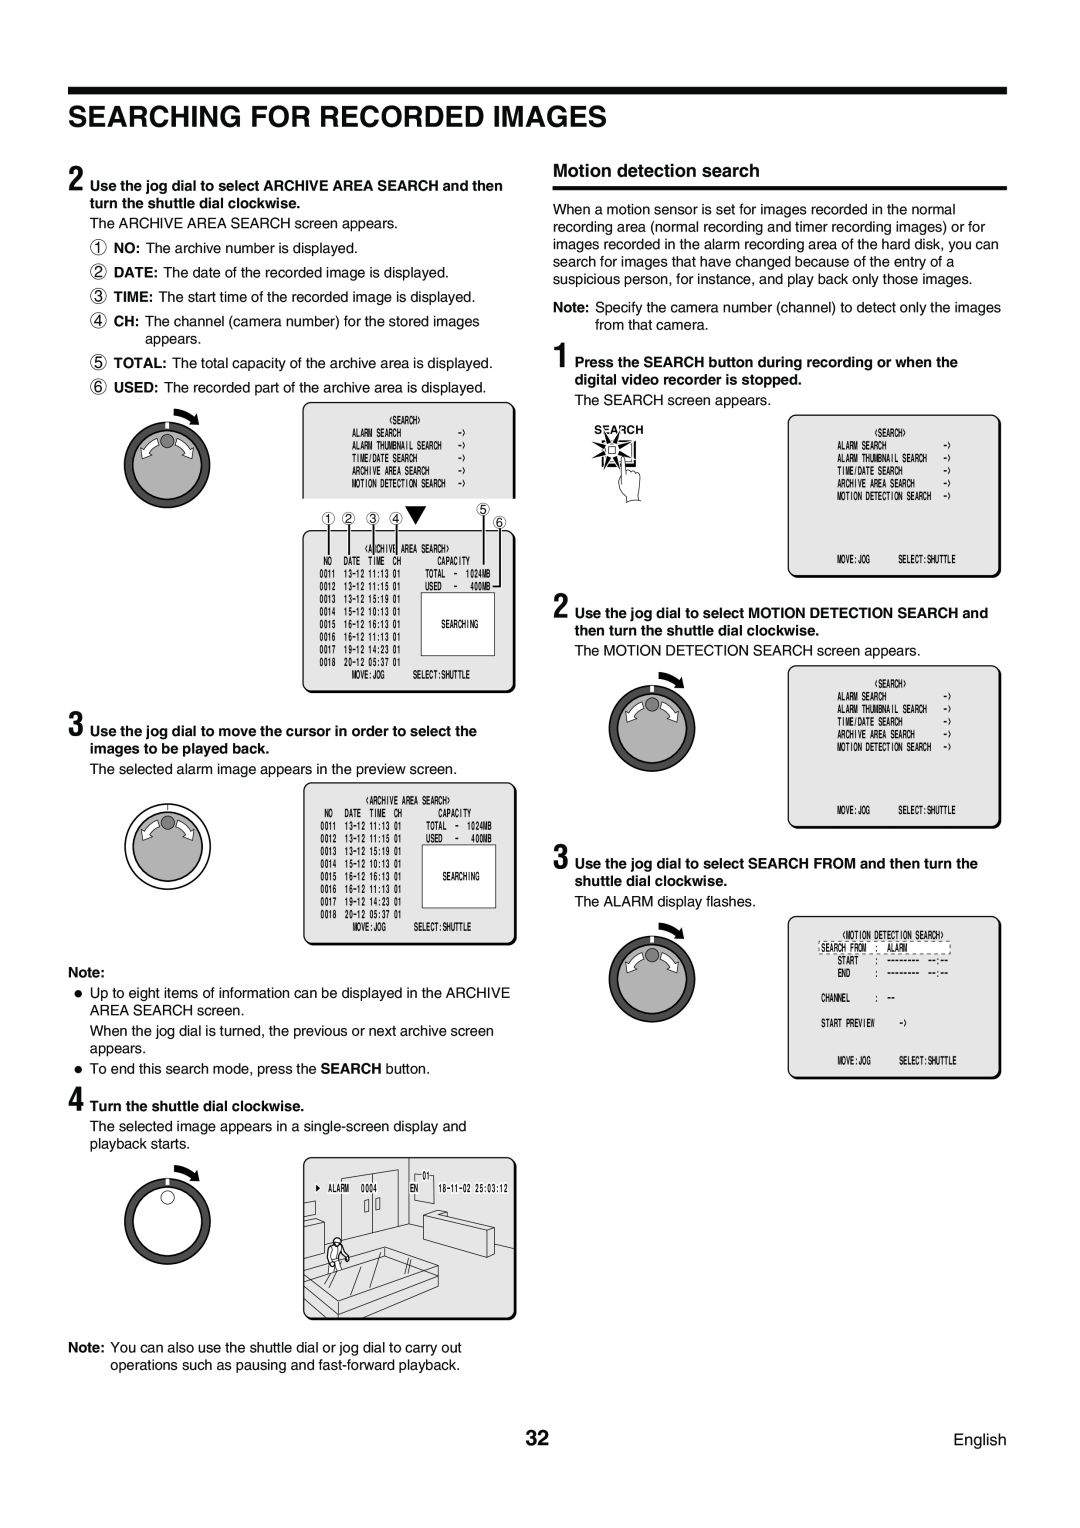 Sanyo DSR-3009P instruction manual Searching For Recorded Images, Motion detection search, 1 2 3 